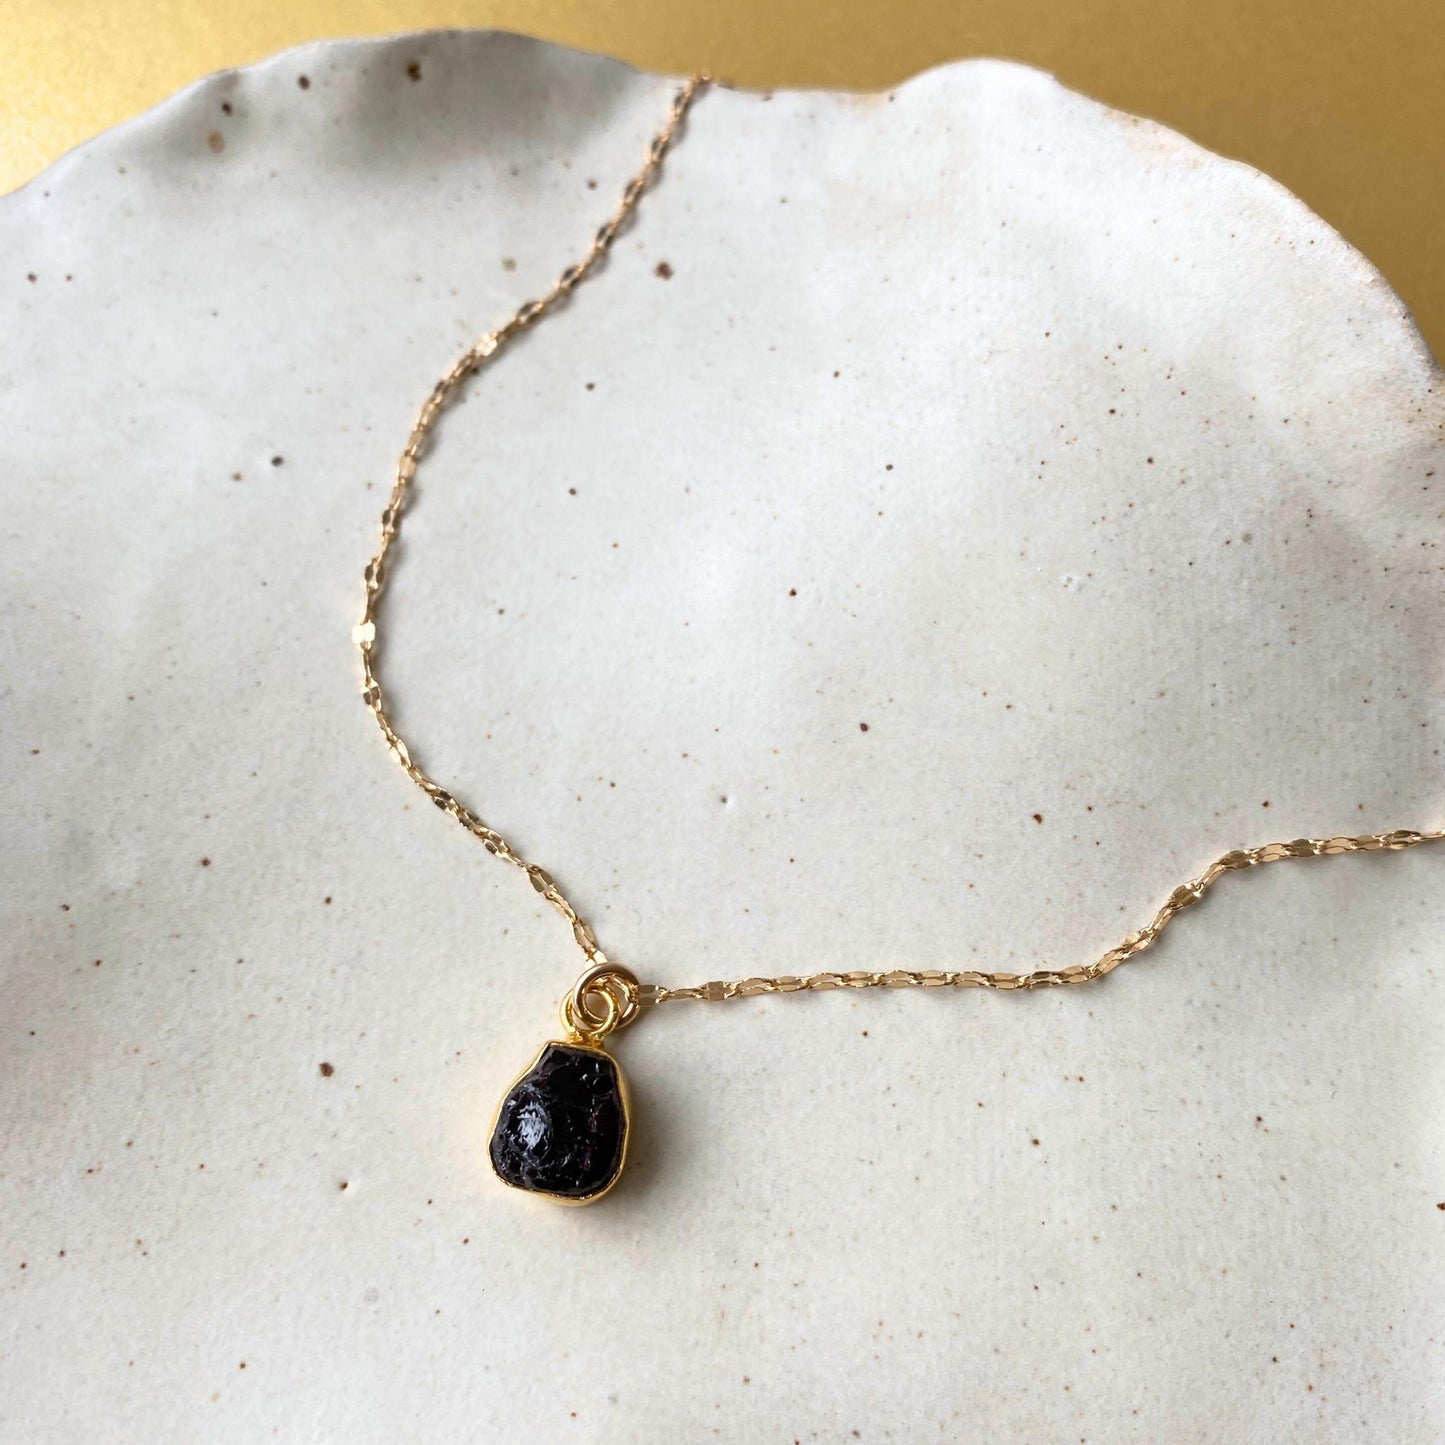 Garnet Carved Vintage Chain Necklace| Protection (Gold Plated)